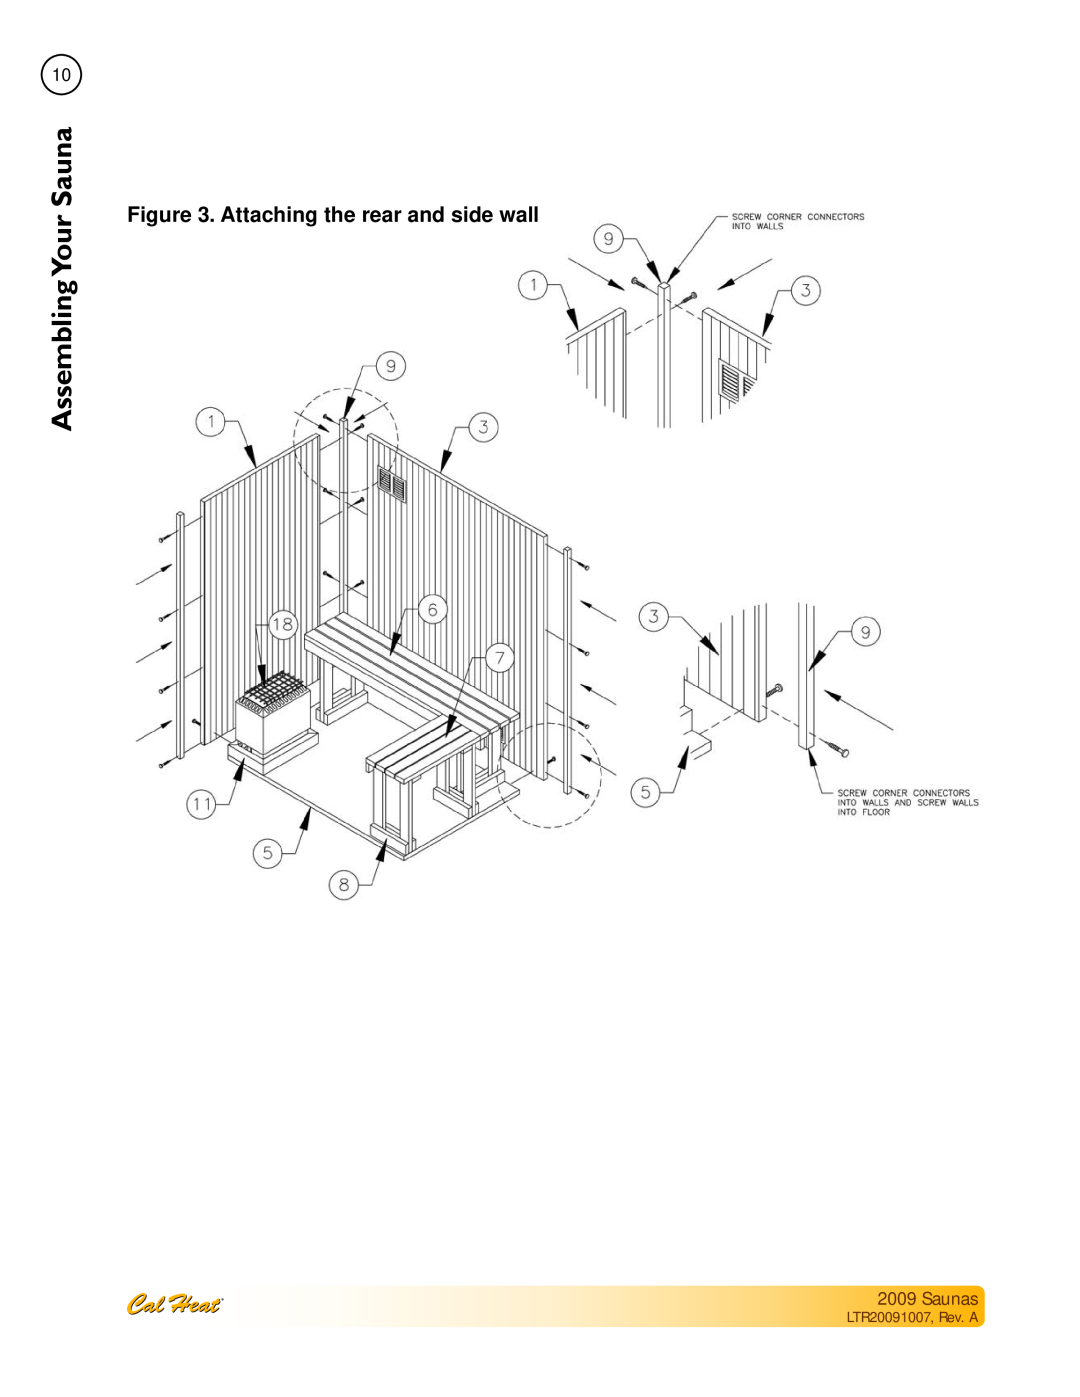 Cal Spas Saunas manual Attaching the rear and side wall, Assembling SaunaYour, LTR20091007, Rev. A 